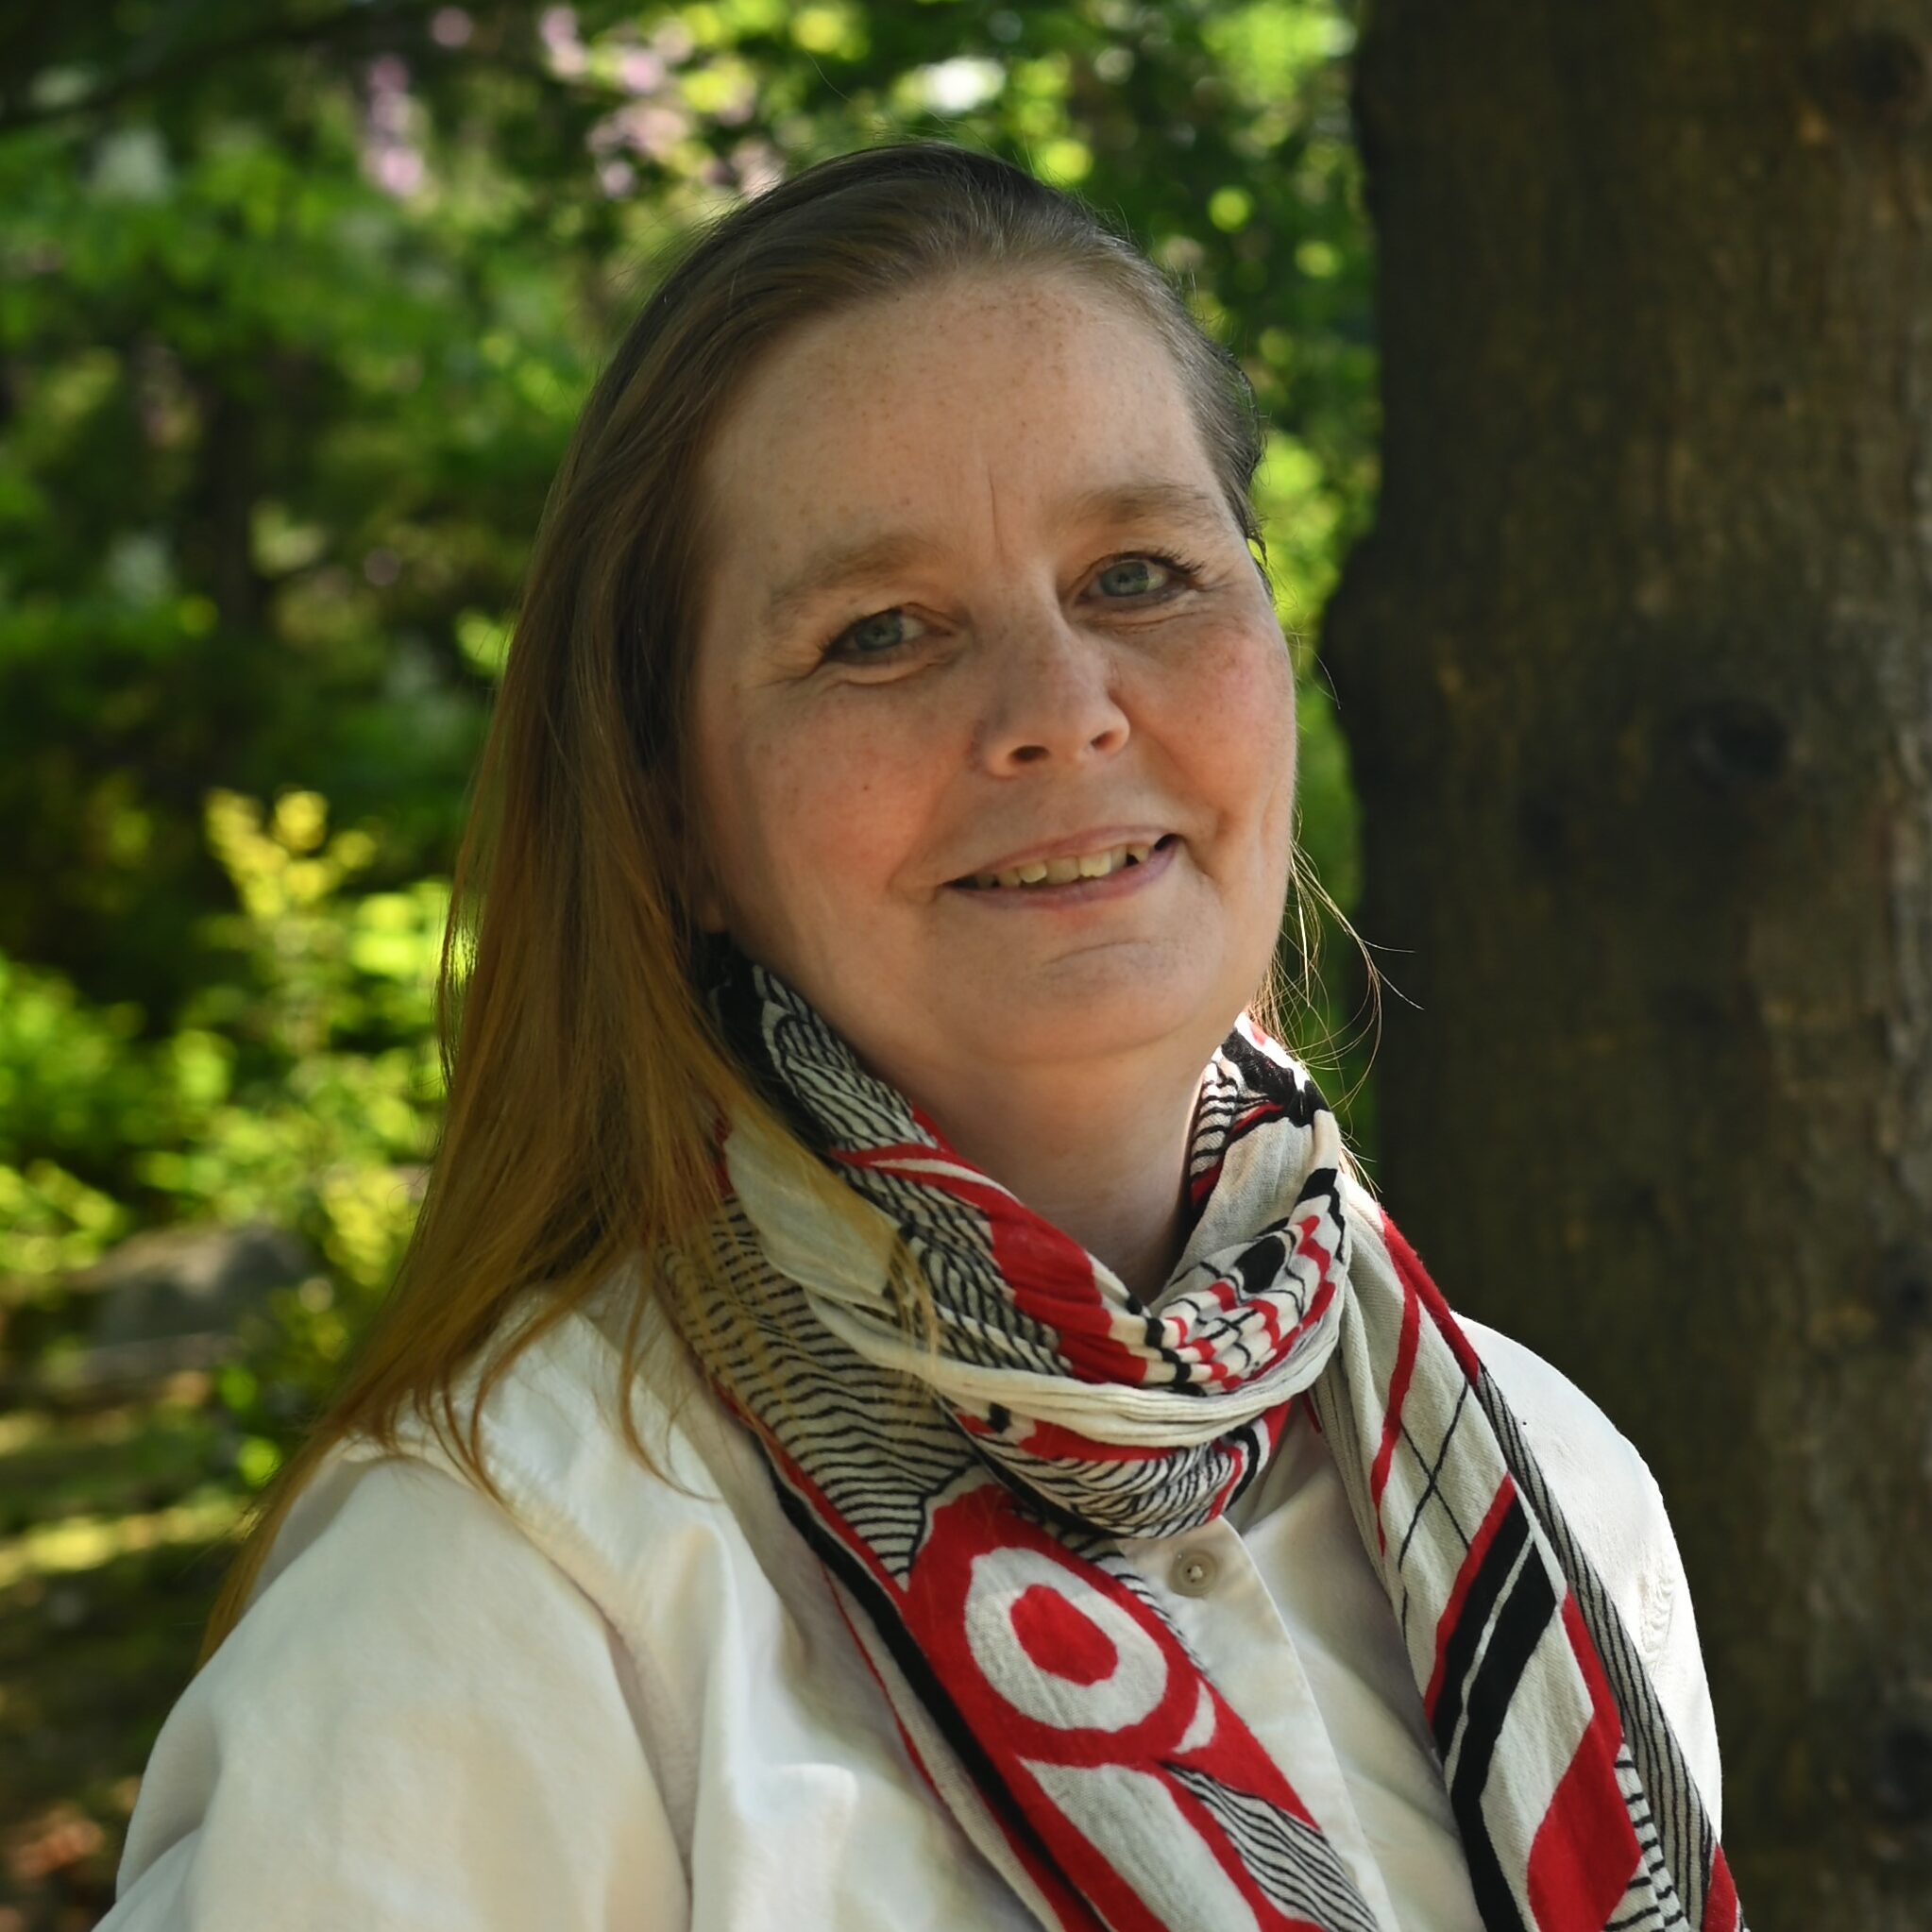 white woman with long hair wearing a white sweater and patterned scarf posing in front of a tree in a park